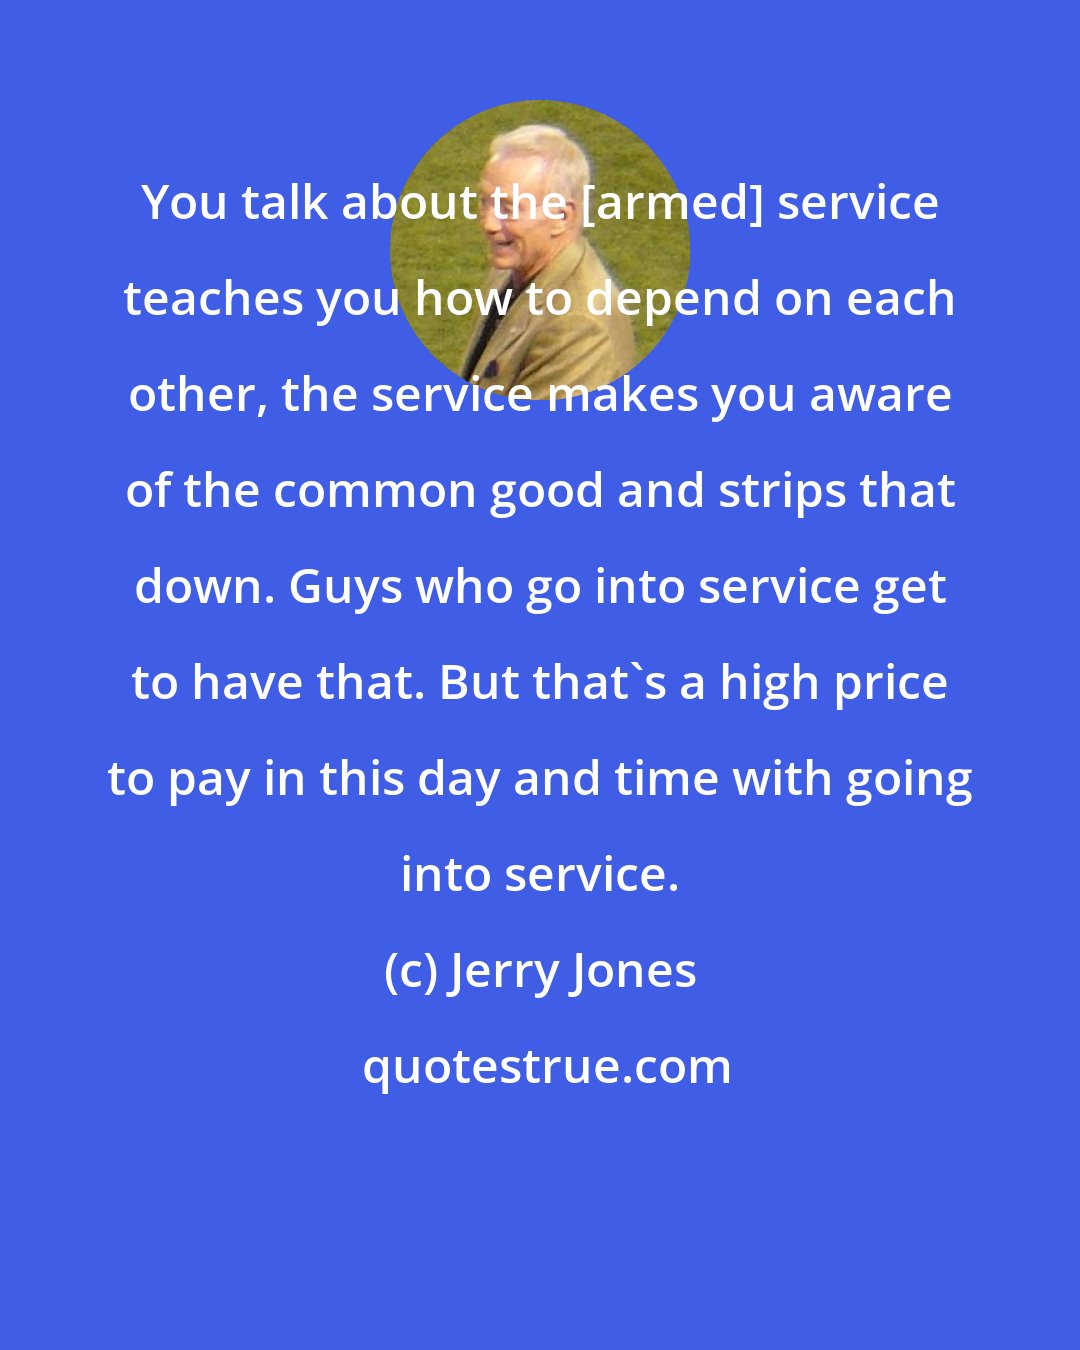 Jerry Jones: You talk about the [armed] service teaches you how to depend on each other, the service makes you aware of the common good and strips that down. Guys who go into service get to have that. But that's a high price to pay in this day and time with going into service.